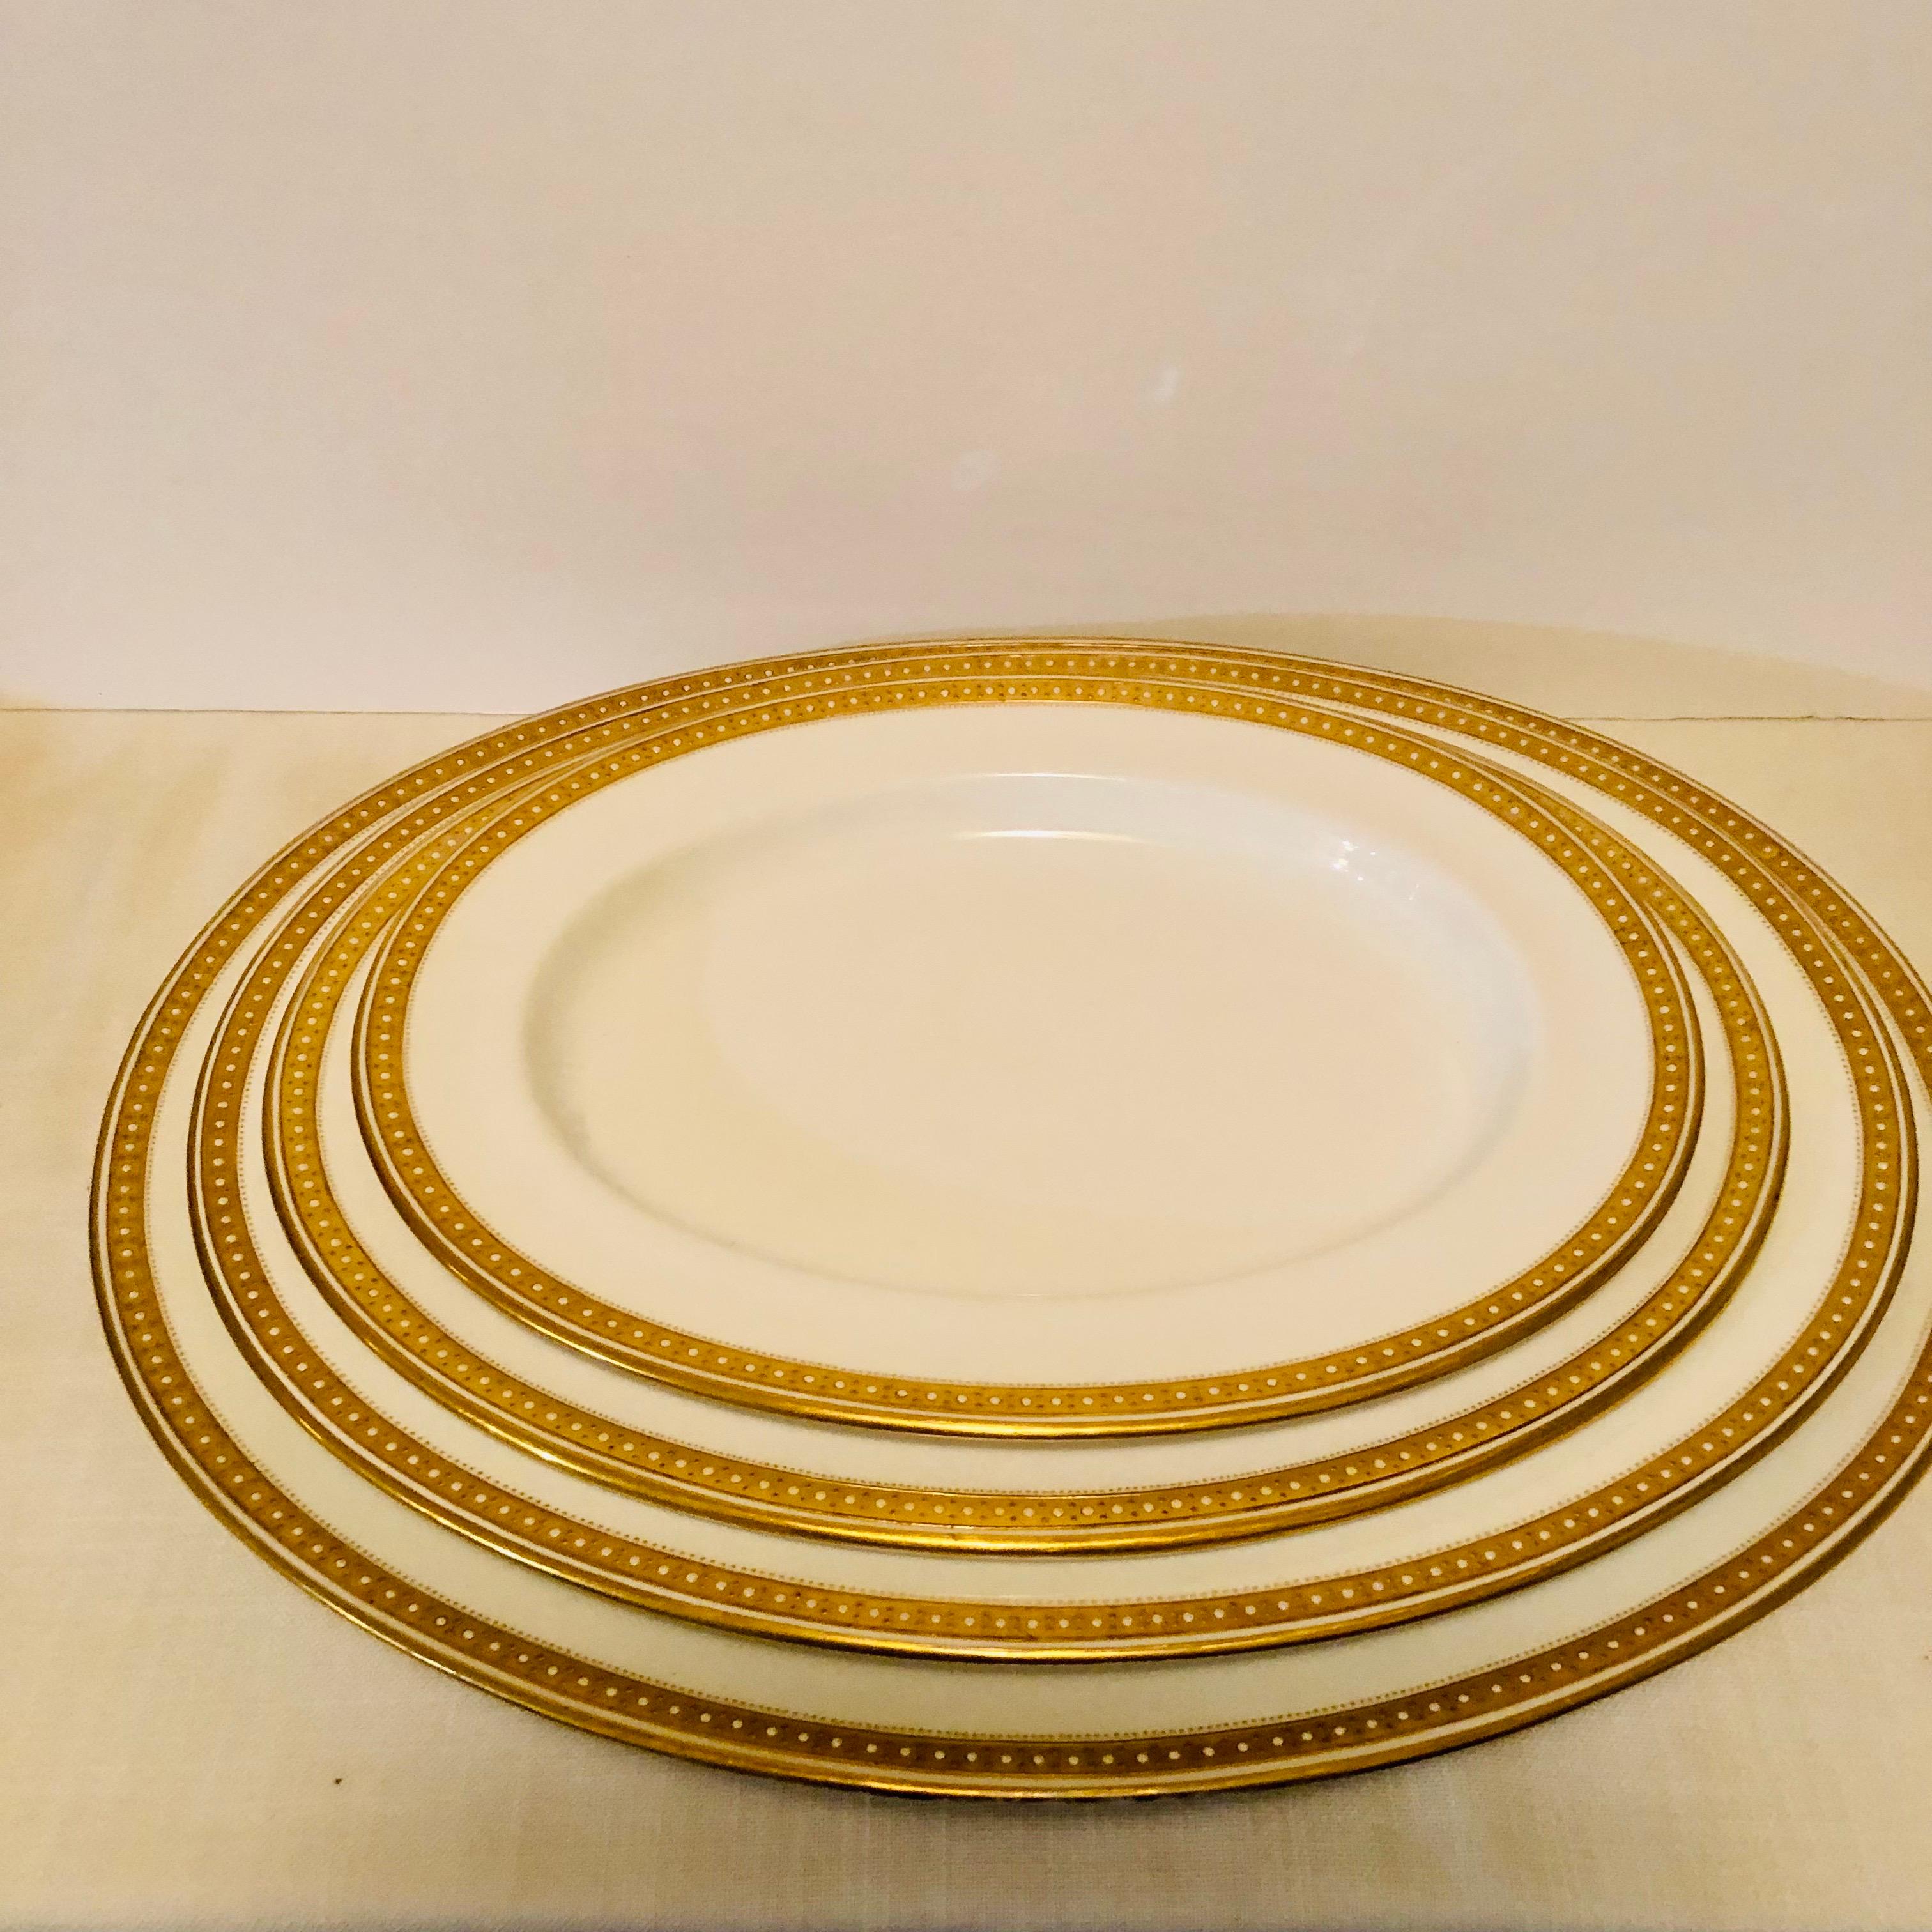 Gilt Nest of Four Spode Copeland Serving Platters With Gold Border and White Jeweling